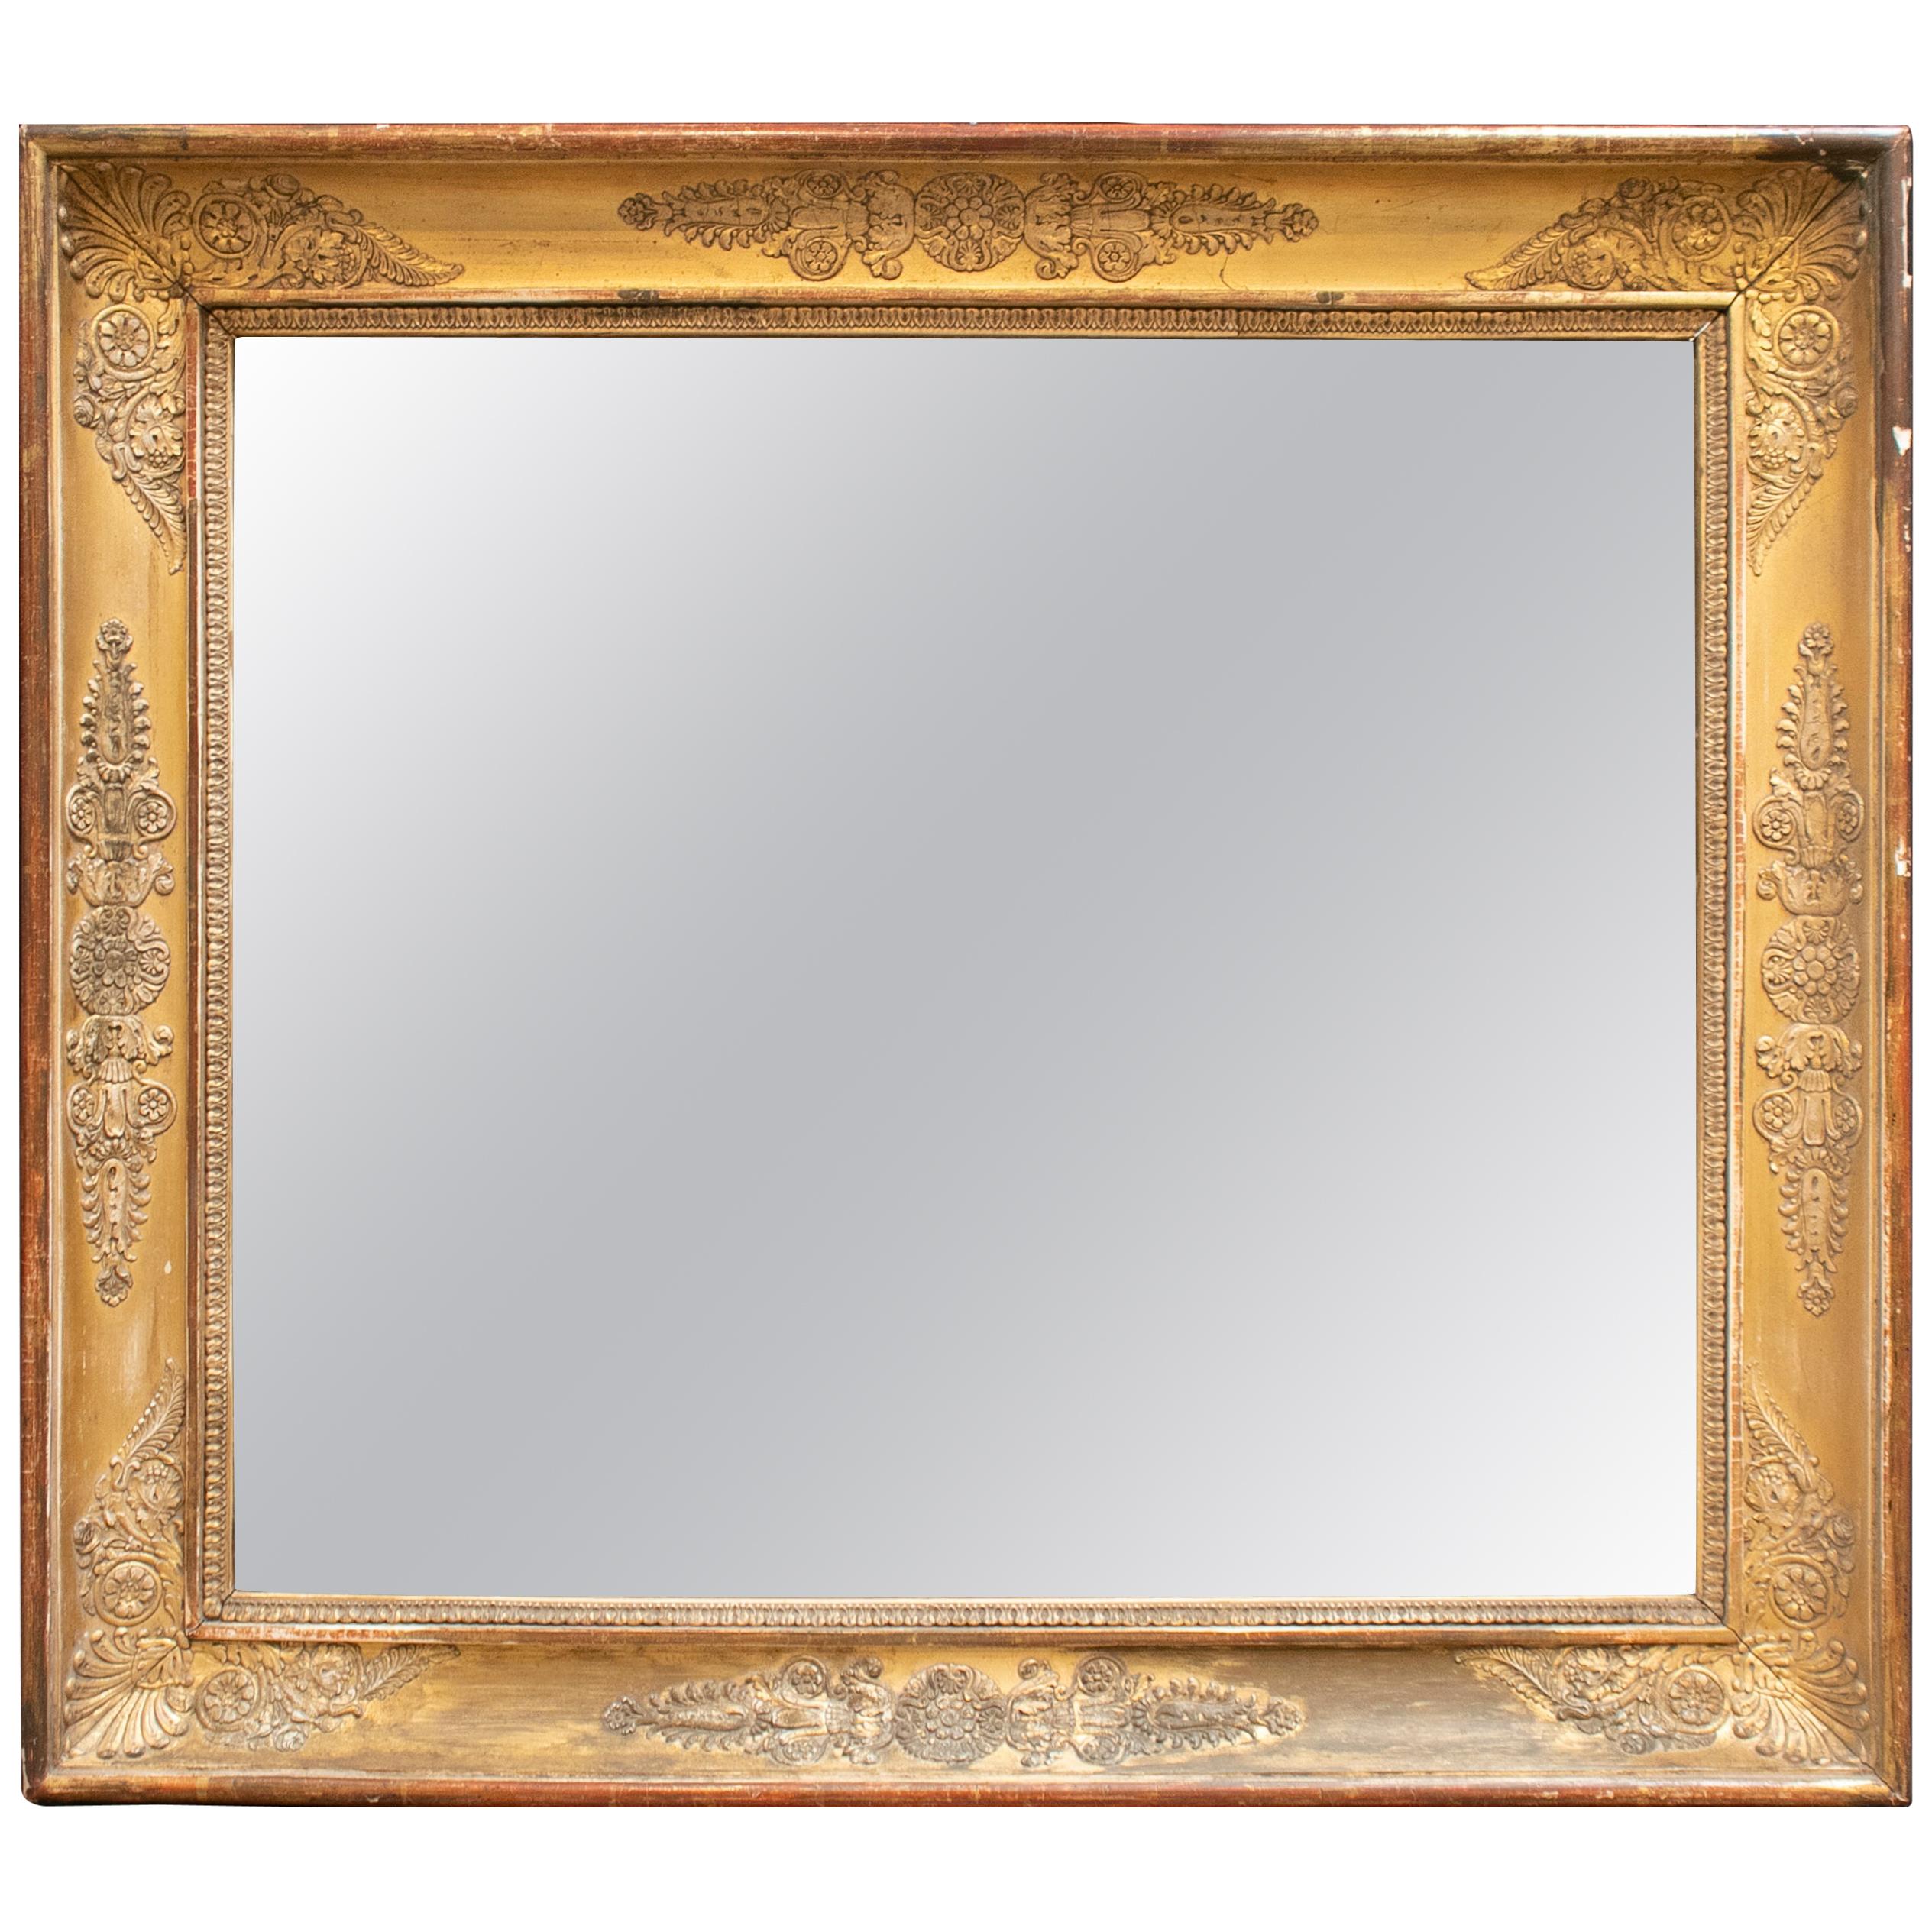 19th Century French Mirror with Wooden Flower Decorated Golden Frame